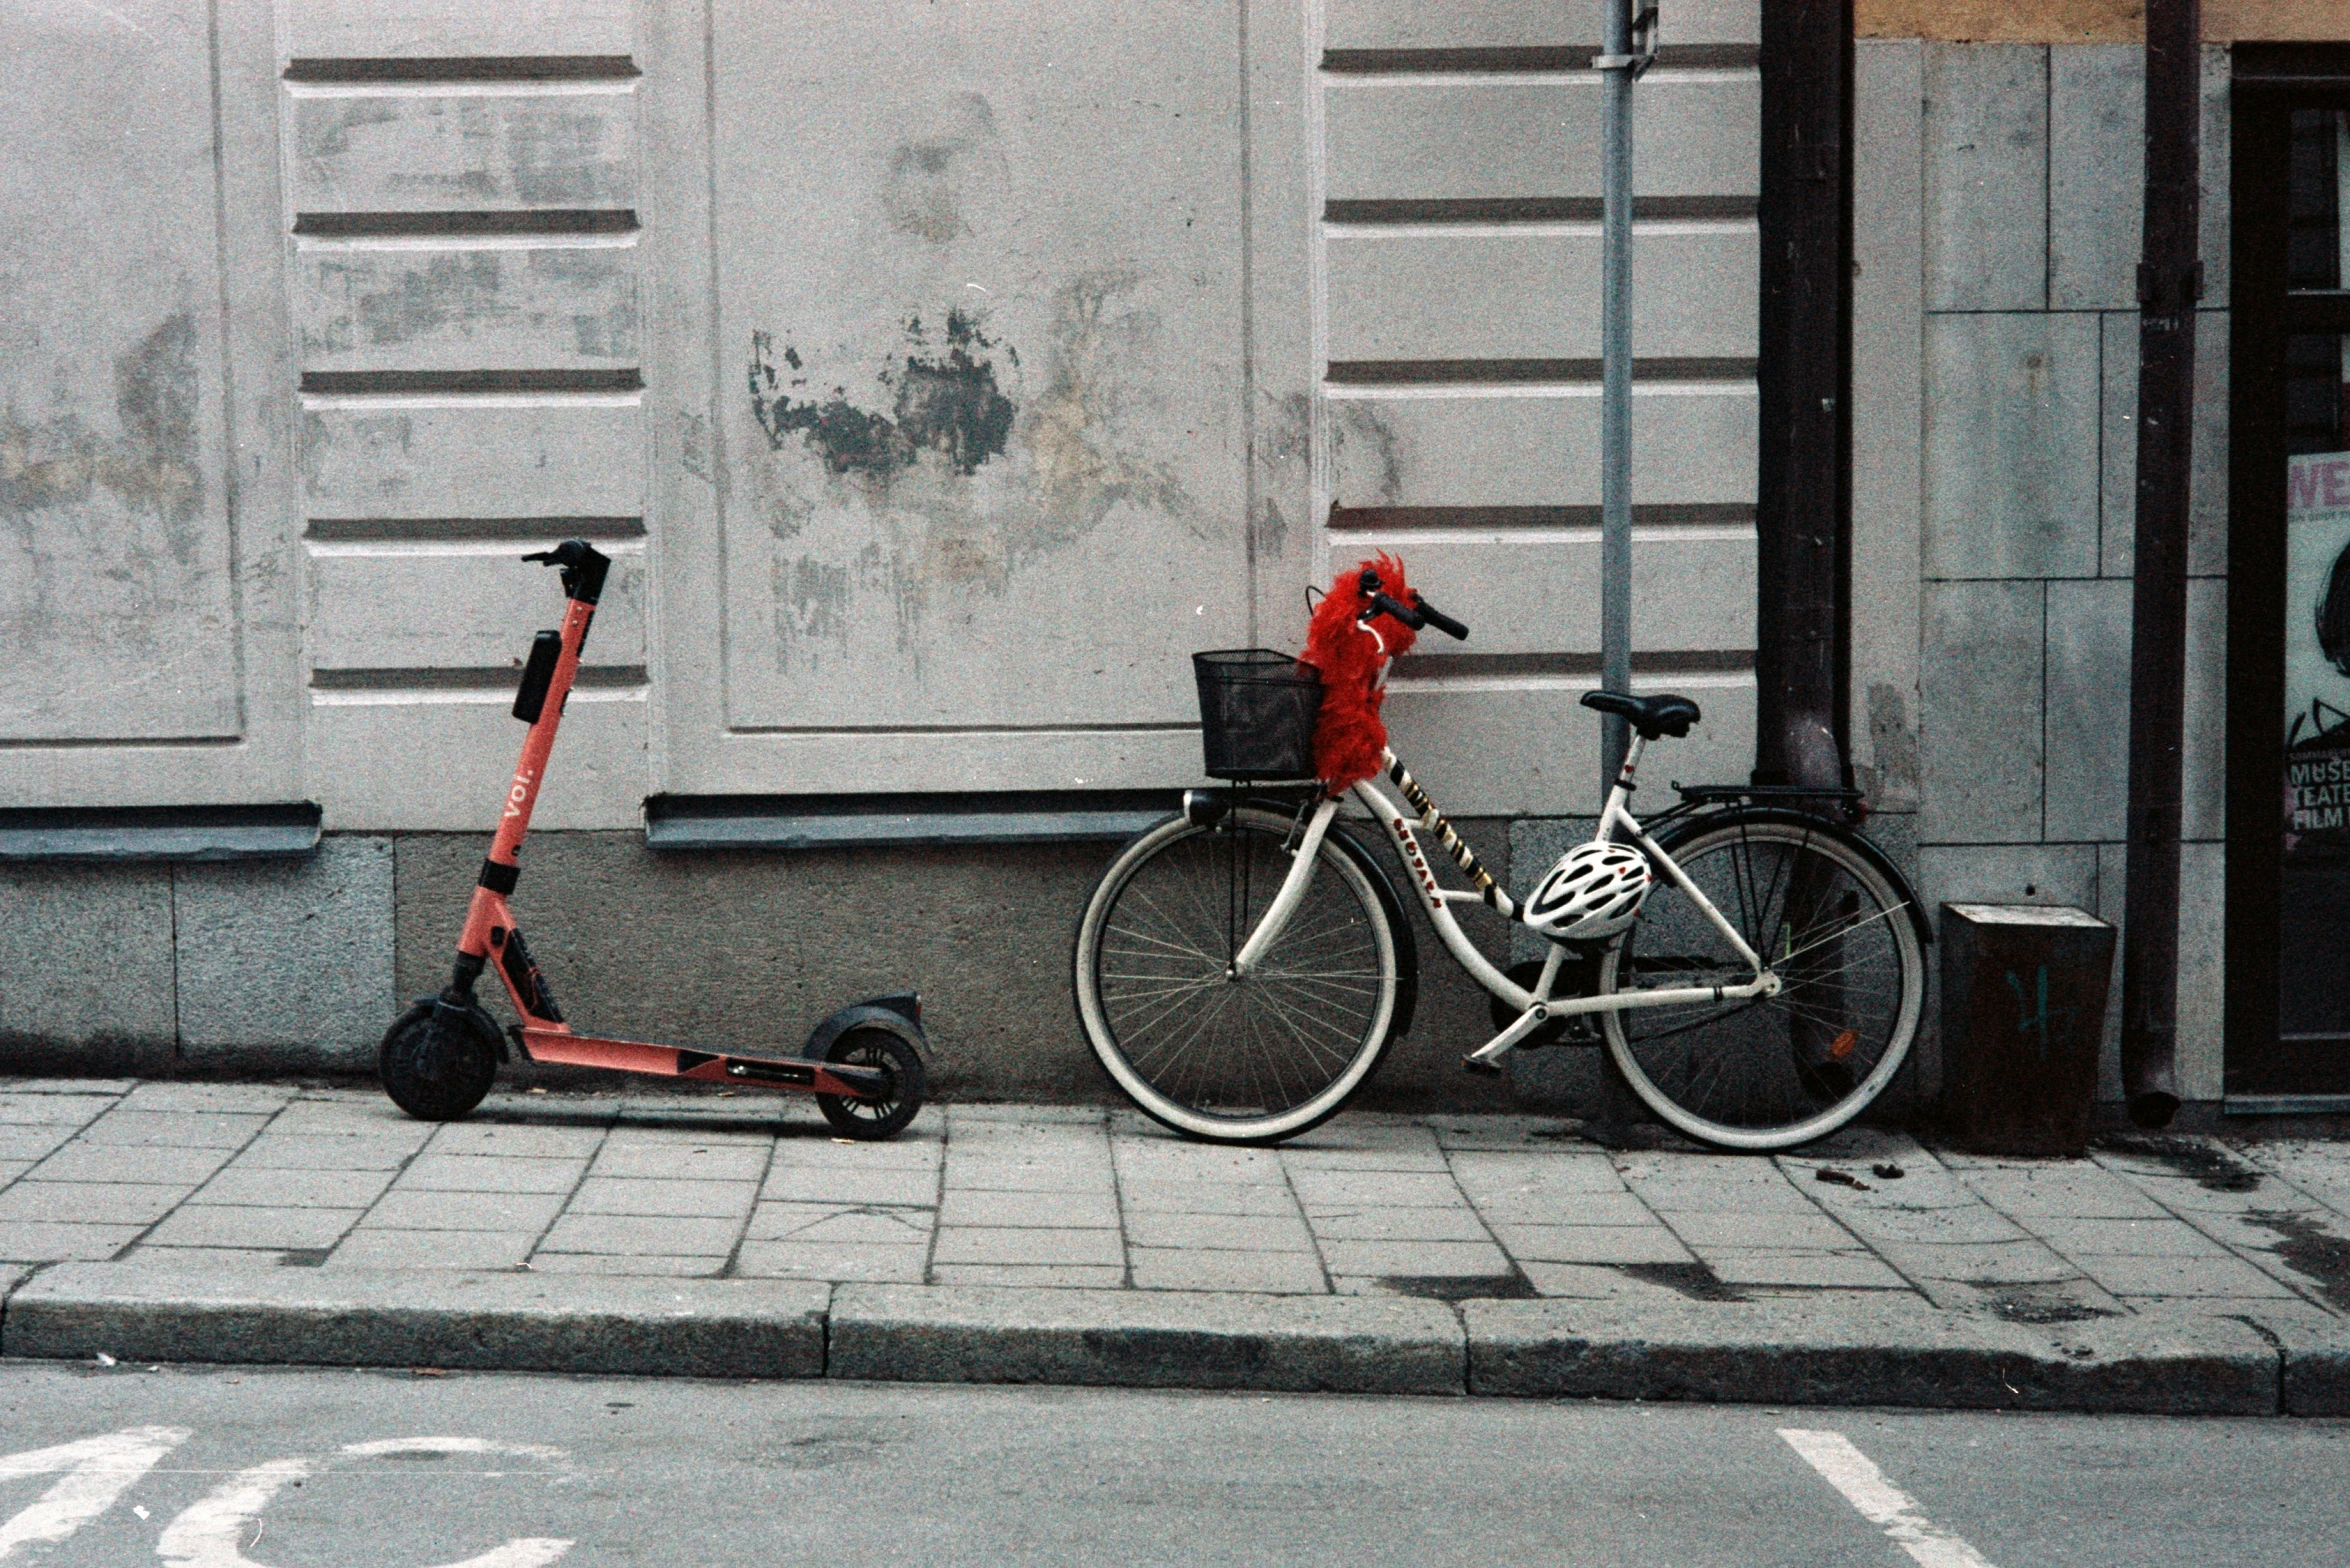 a scooter parked next to a bicycle on a sidewalk